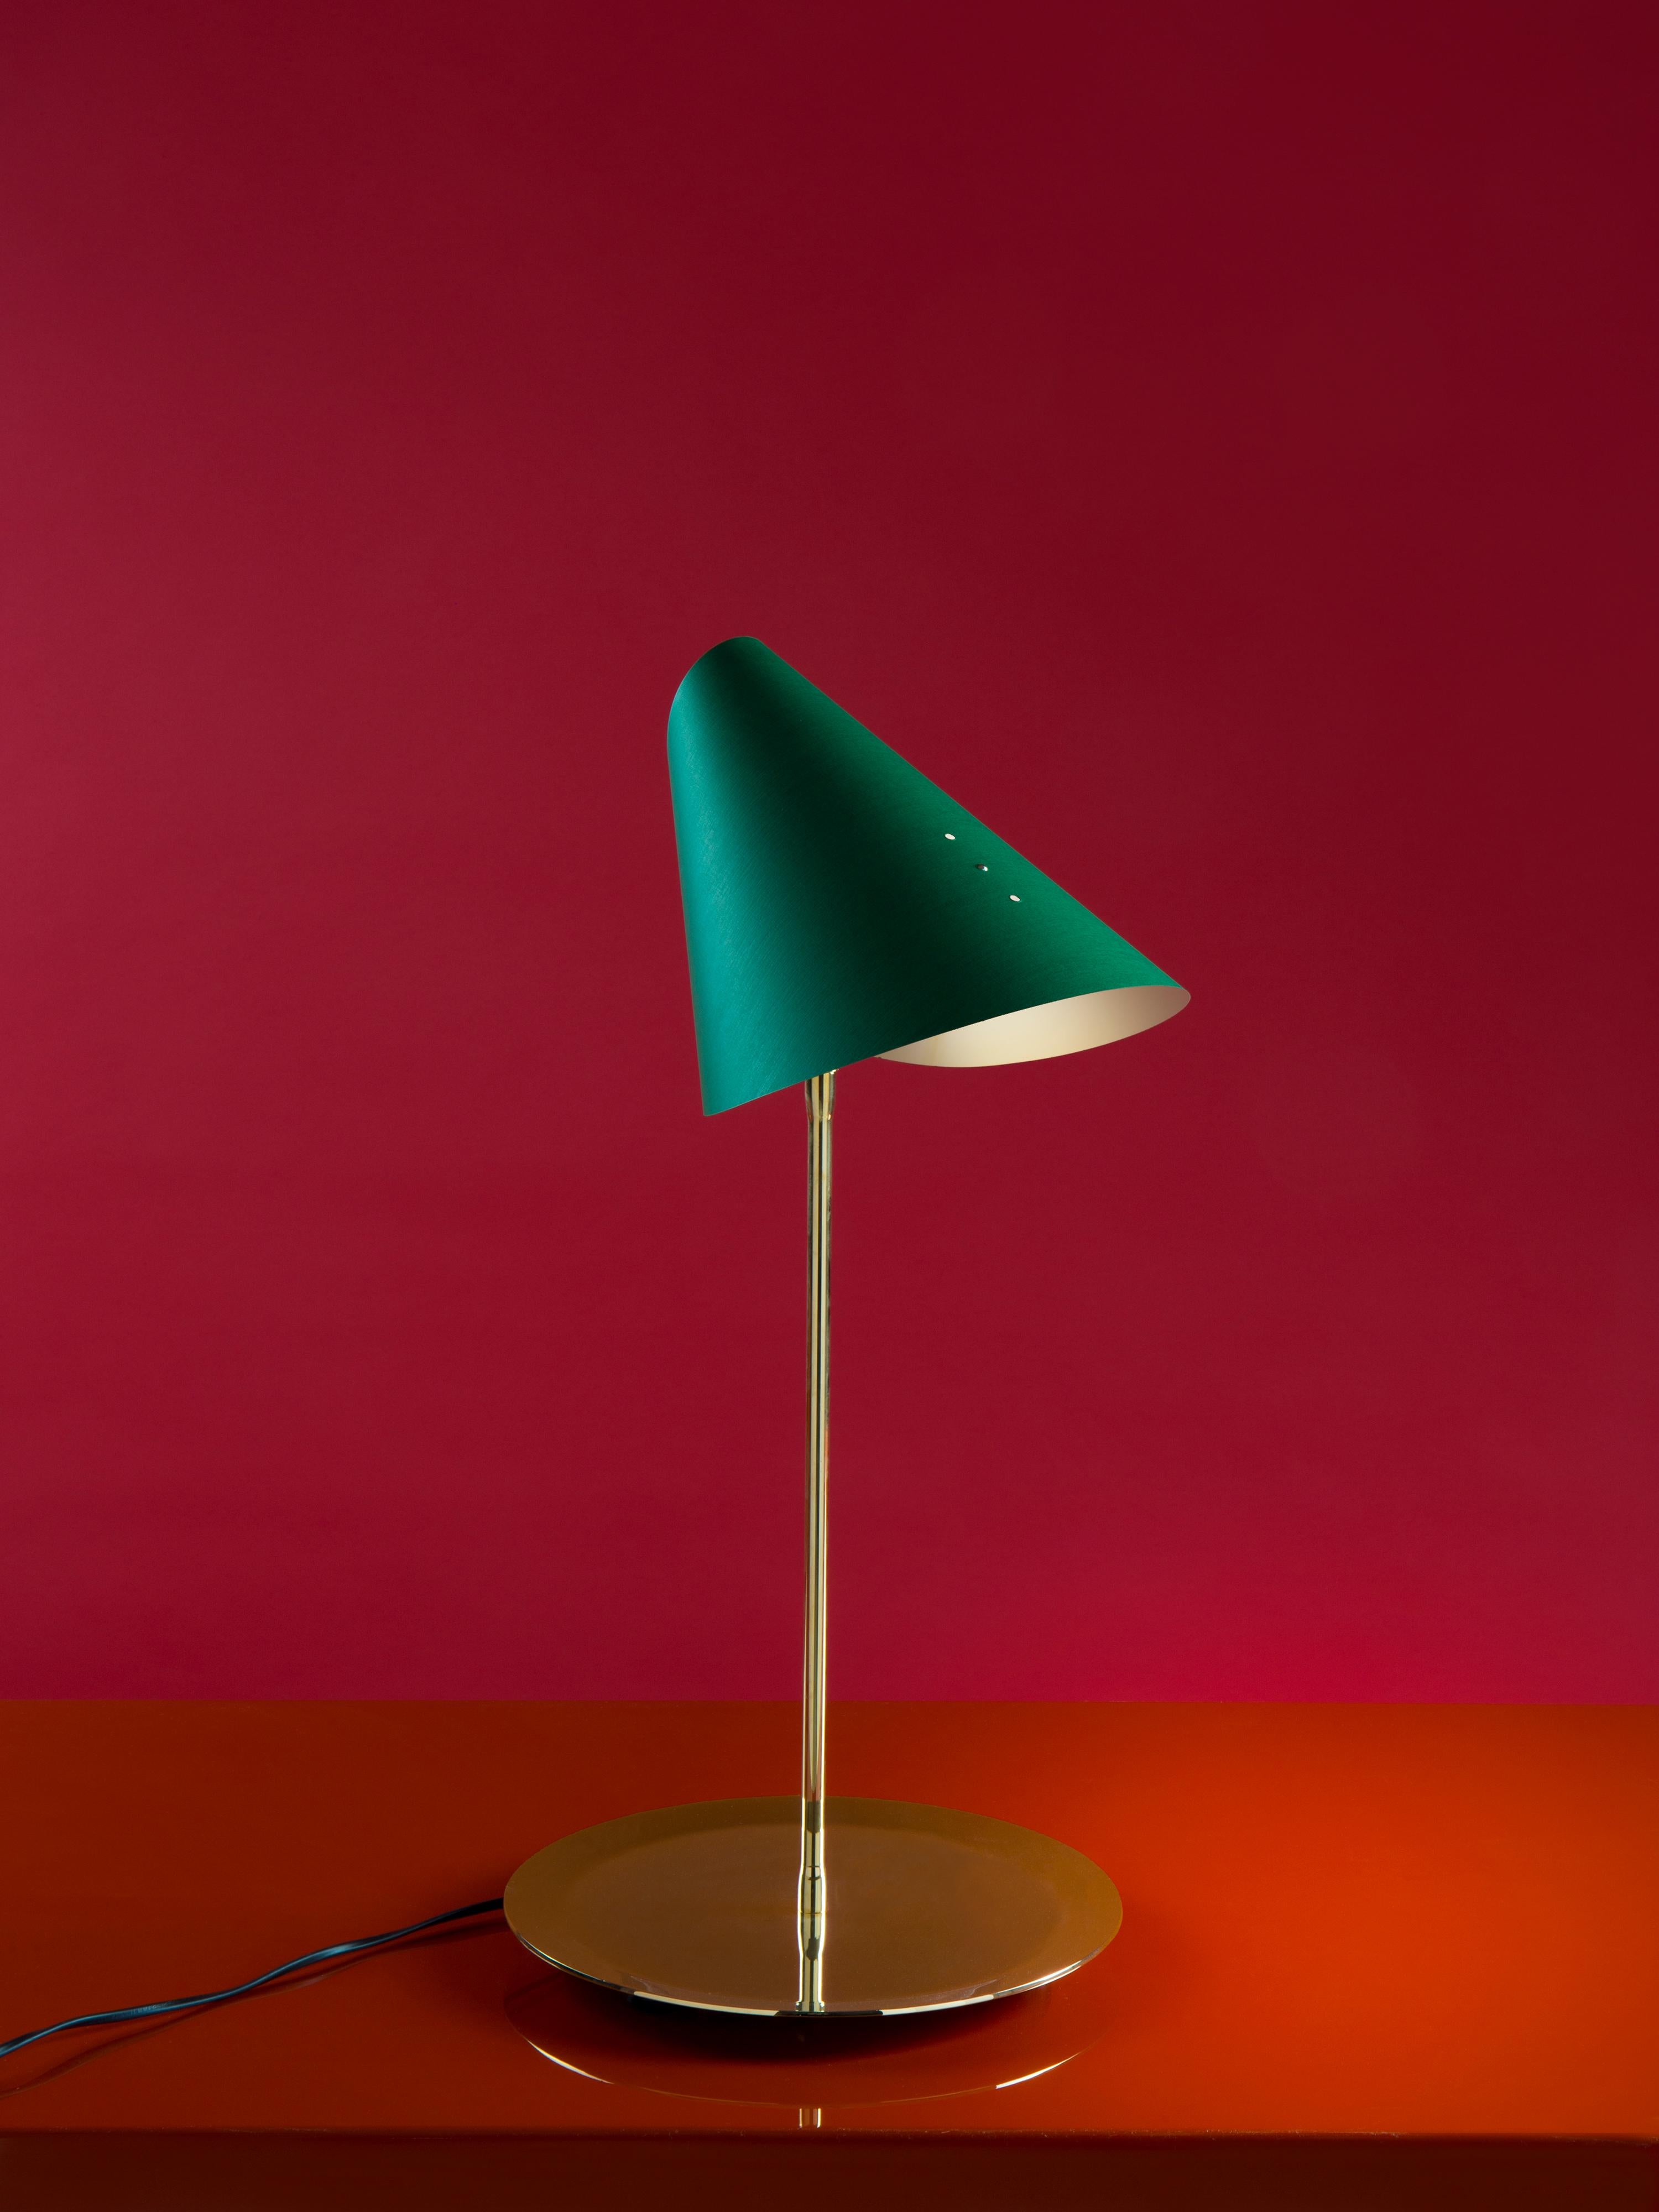 Designed in 1972 - Paradisoterrestre Edition

Materials: brass-plated metal structure, cardboard canvas light diffuser

Colours: diffuser in white, black, green, blue

“A flash of joy and poetry. The simplest directional lampshade in history